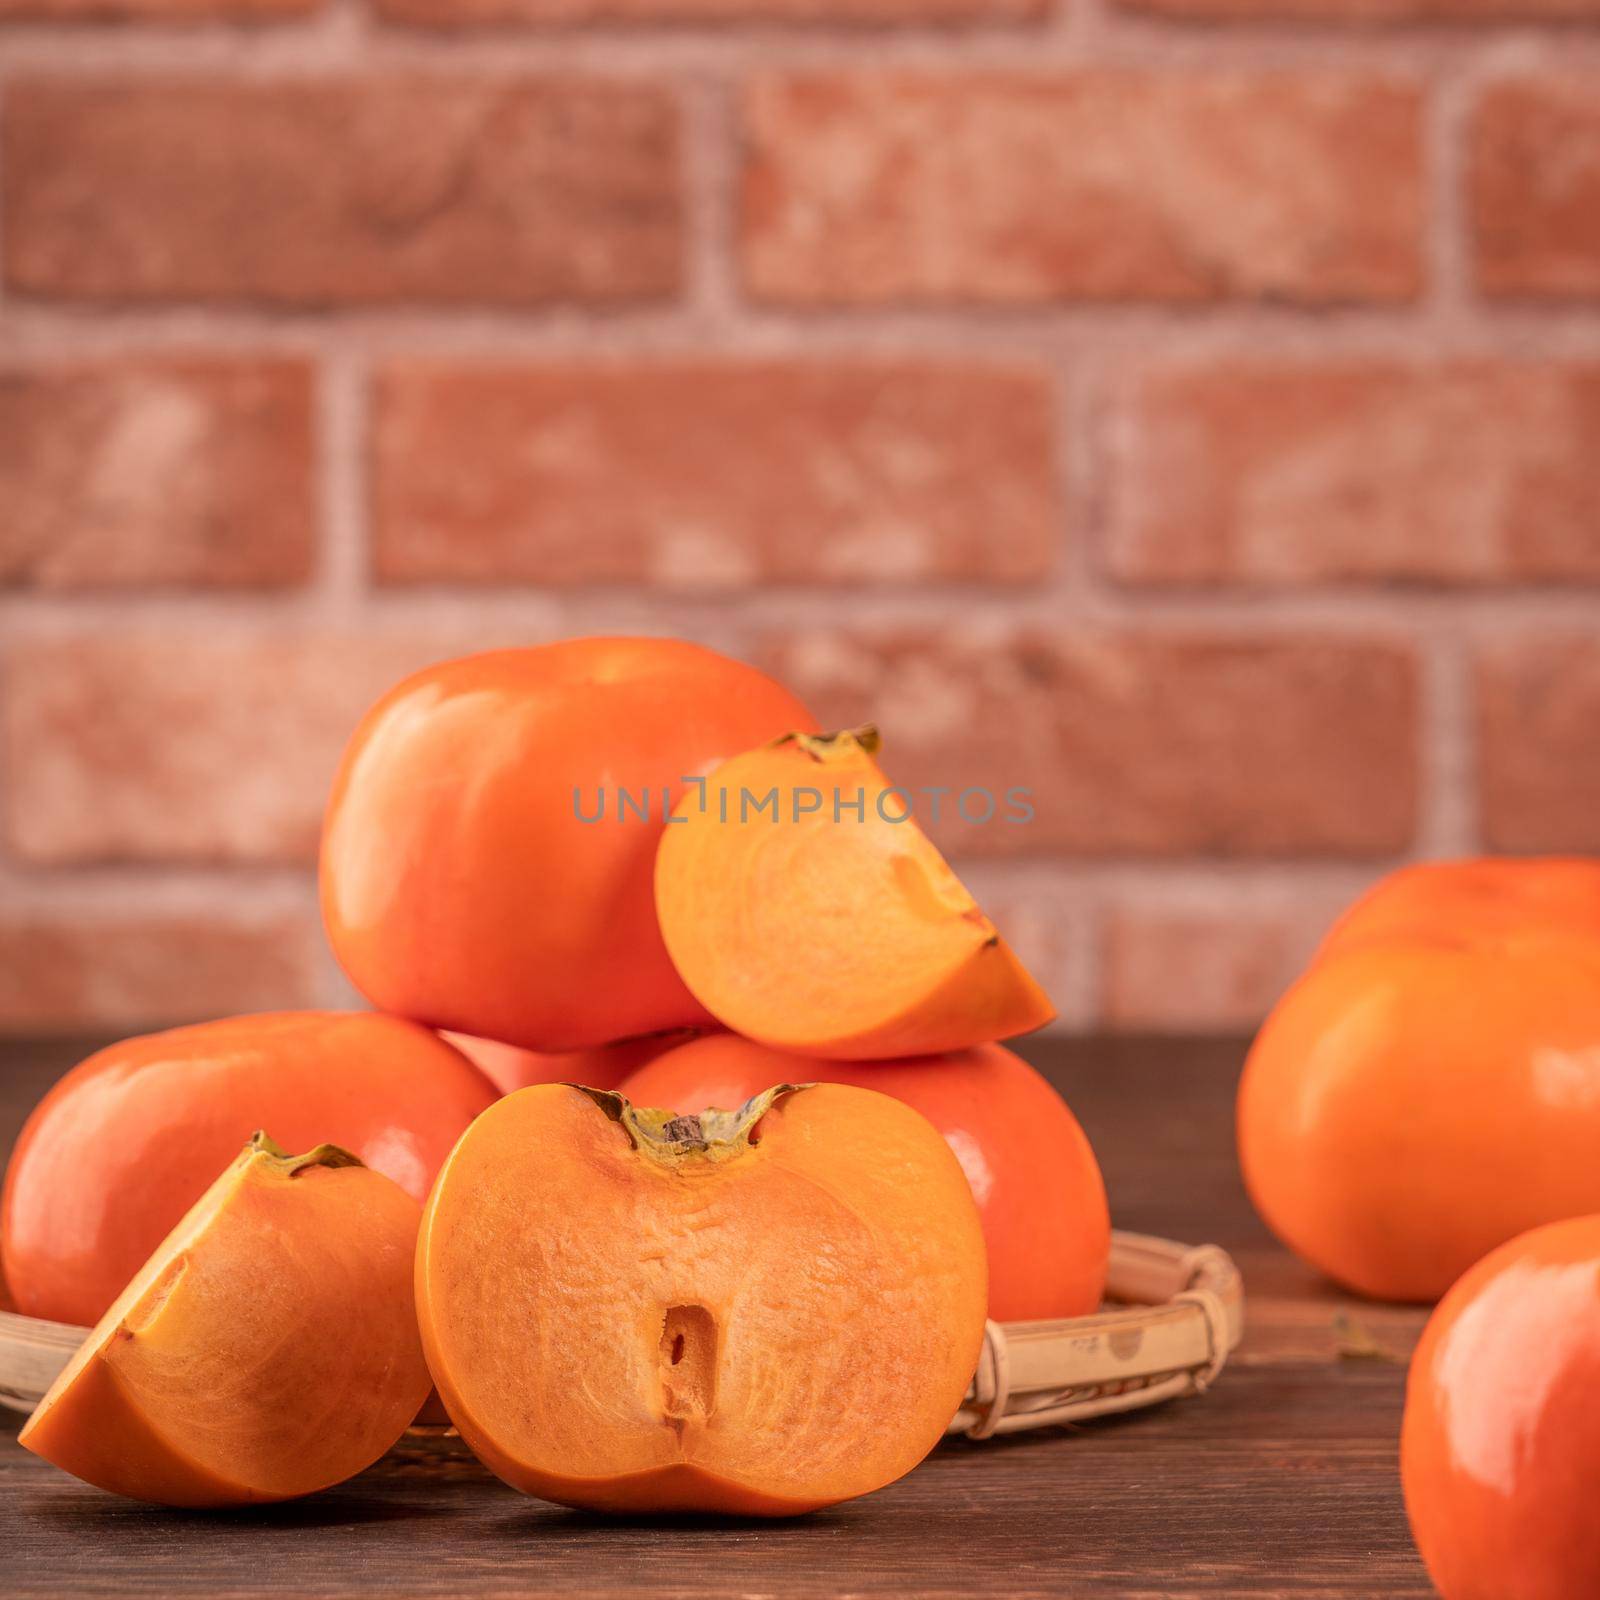 Fresh beautiful sliced sweet persimmon kaki on dark wooden table with red brick wall background, Chinese lunar new year fruit design concept, close up. by ROMIXIMAGE